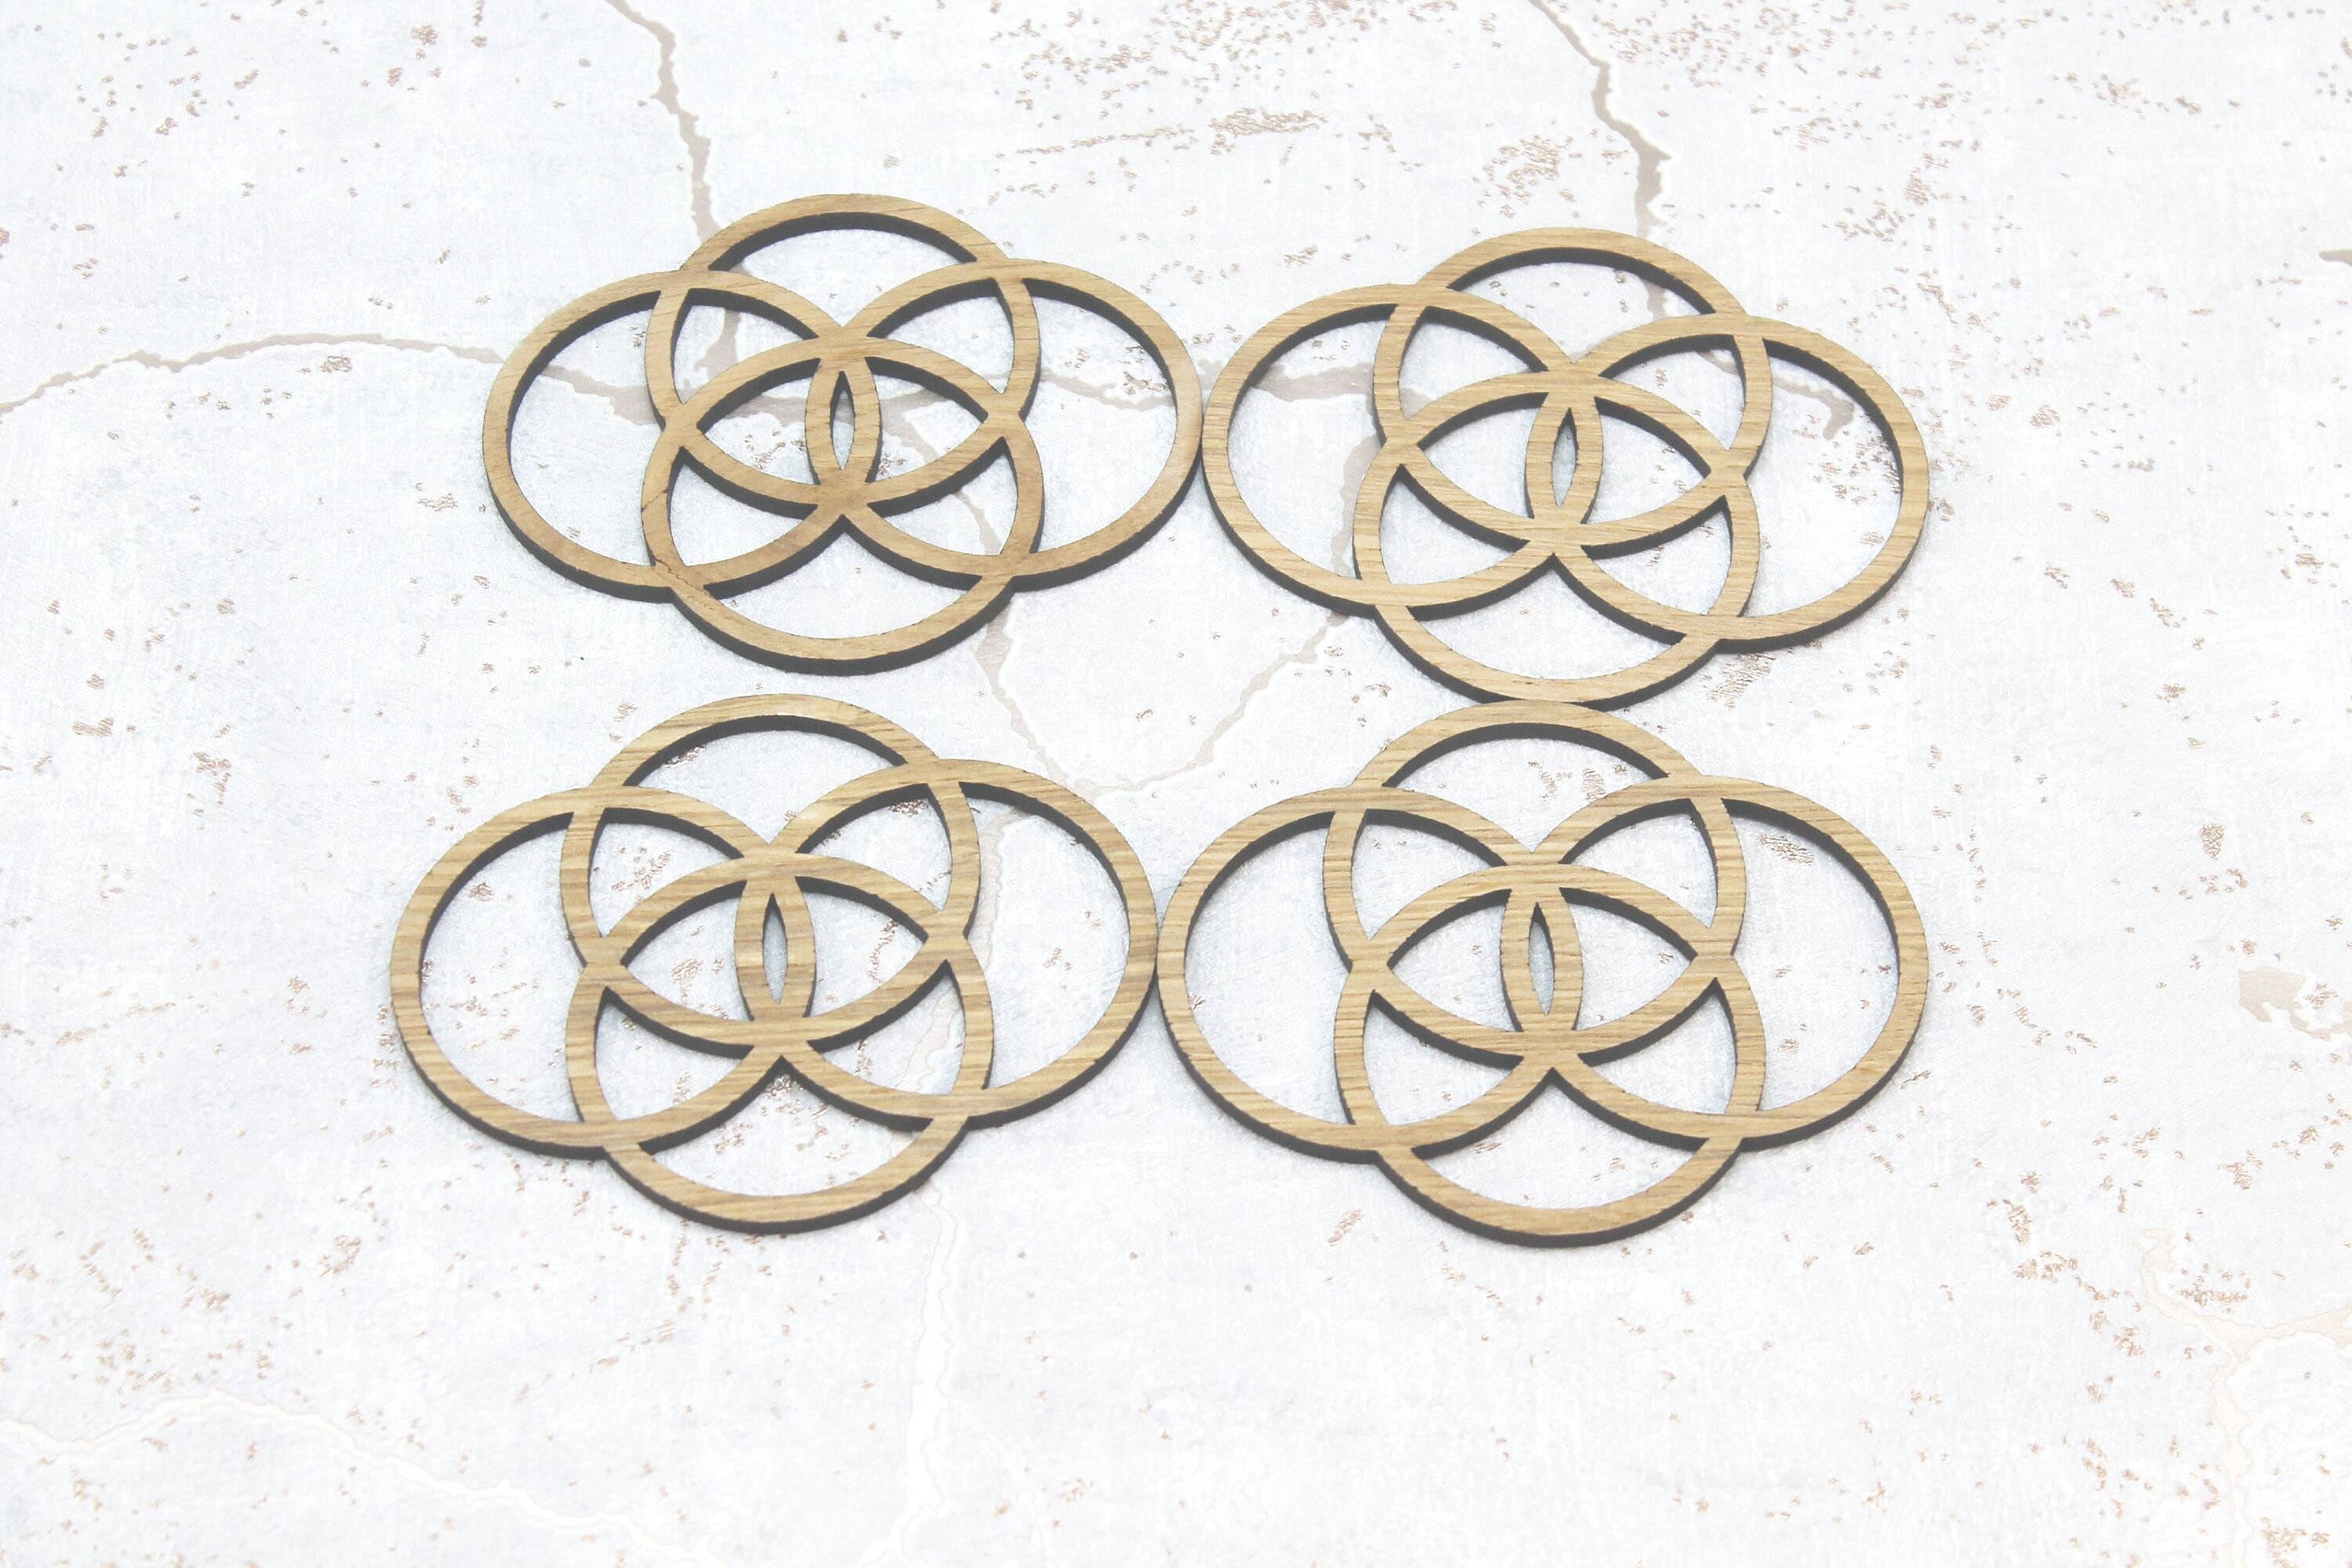 Five Elements of Life; Earth, Water, Fire, Air, and Spirit - Sacred Geometry - Laser Cut Coasters Set of 4